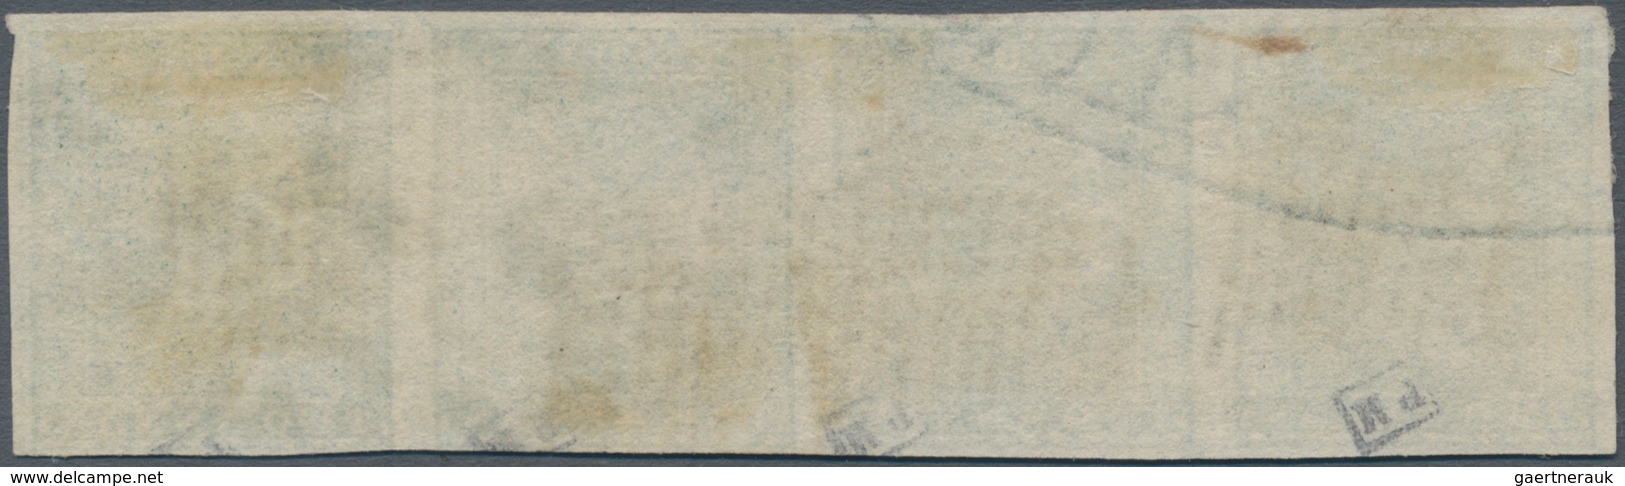 Indien: 1854 2a. Green Horizontal Strip Of Four, Sheet Pos. (in Row 8) 5-8, On Paper Showing Part Of - 1852 Sind Province